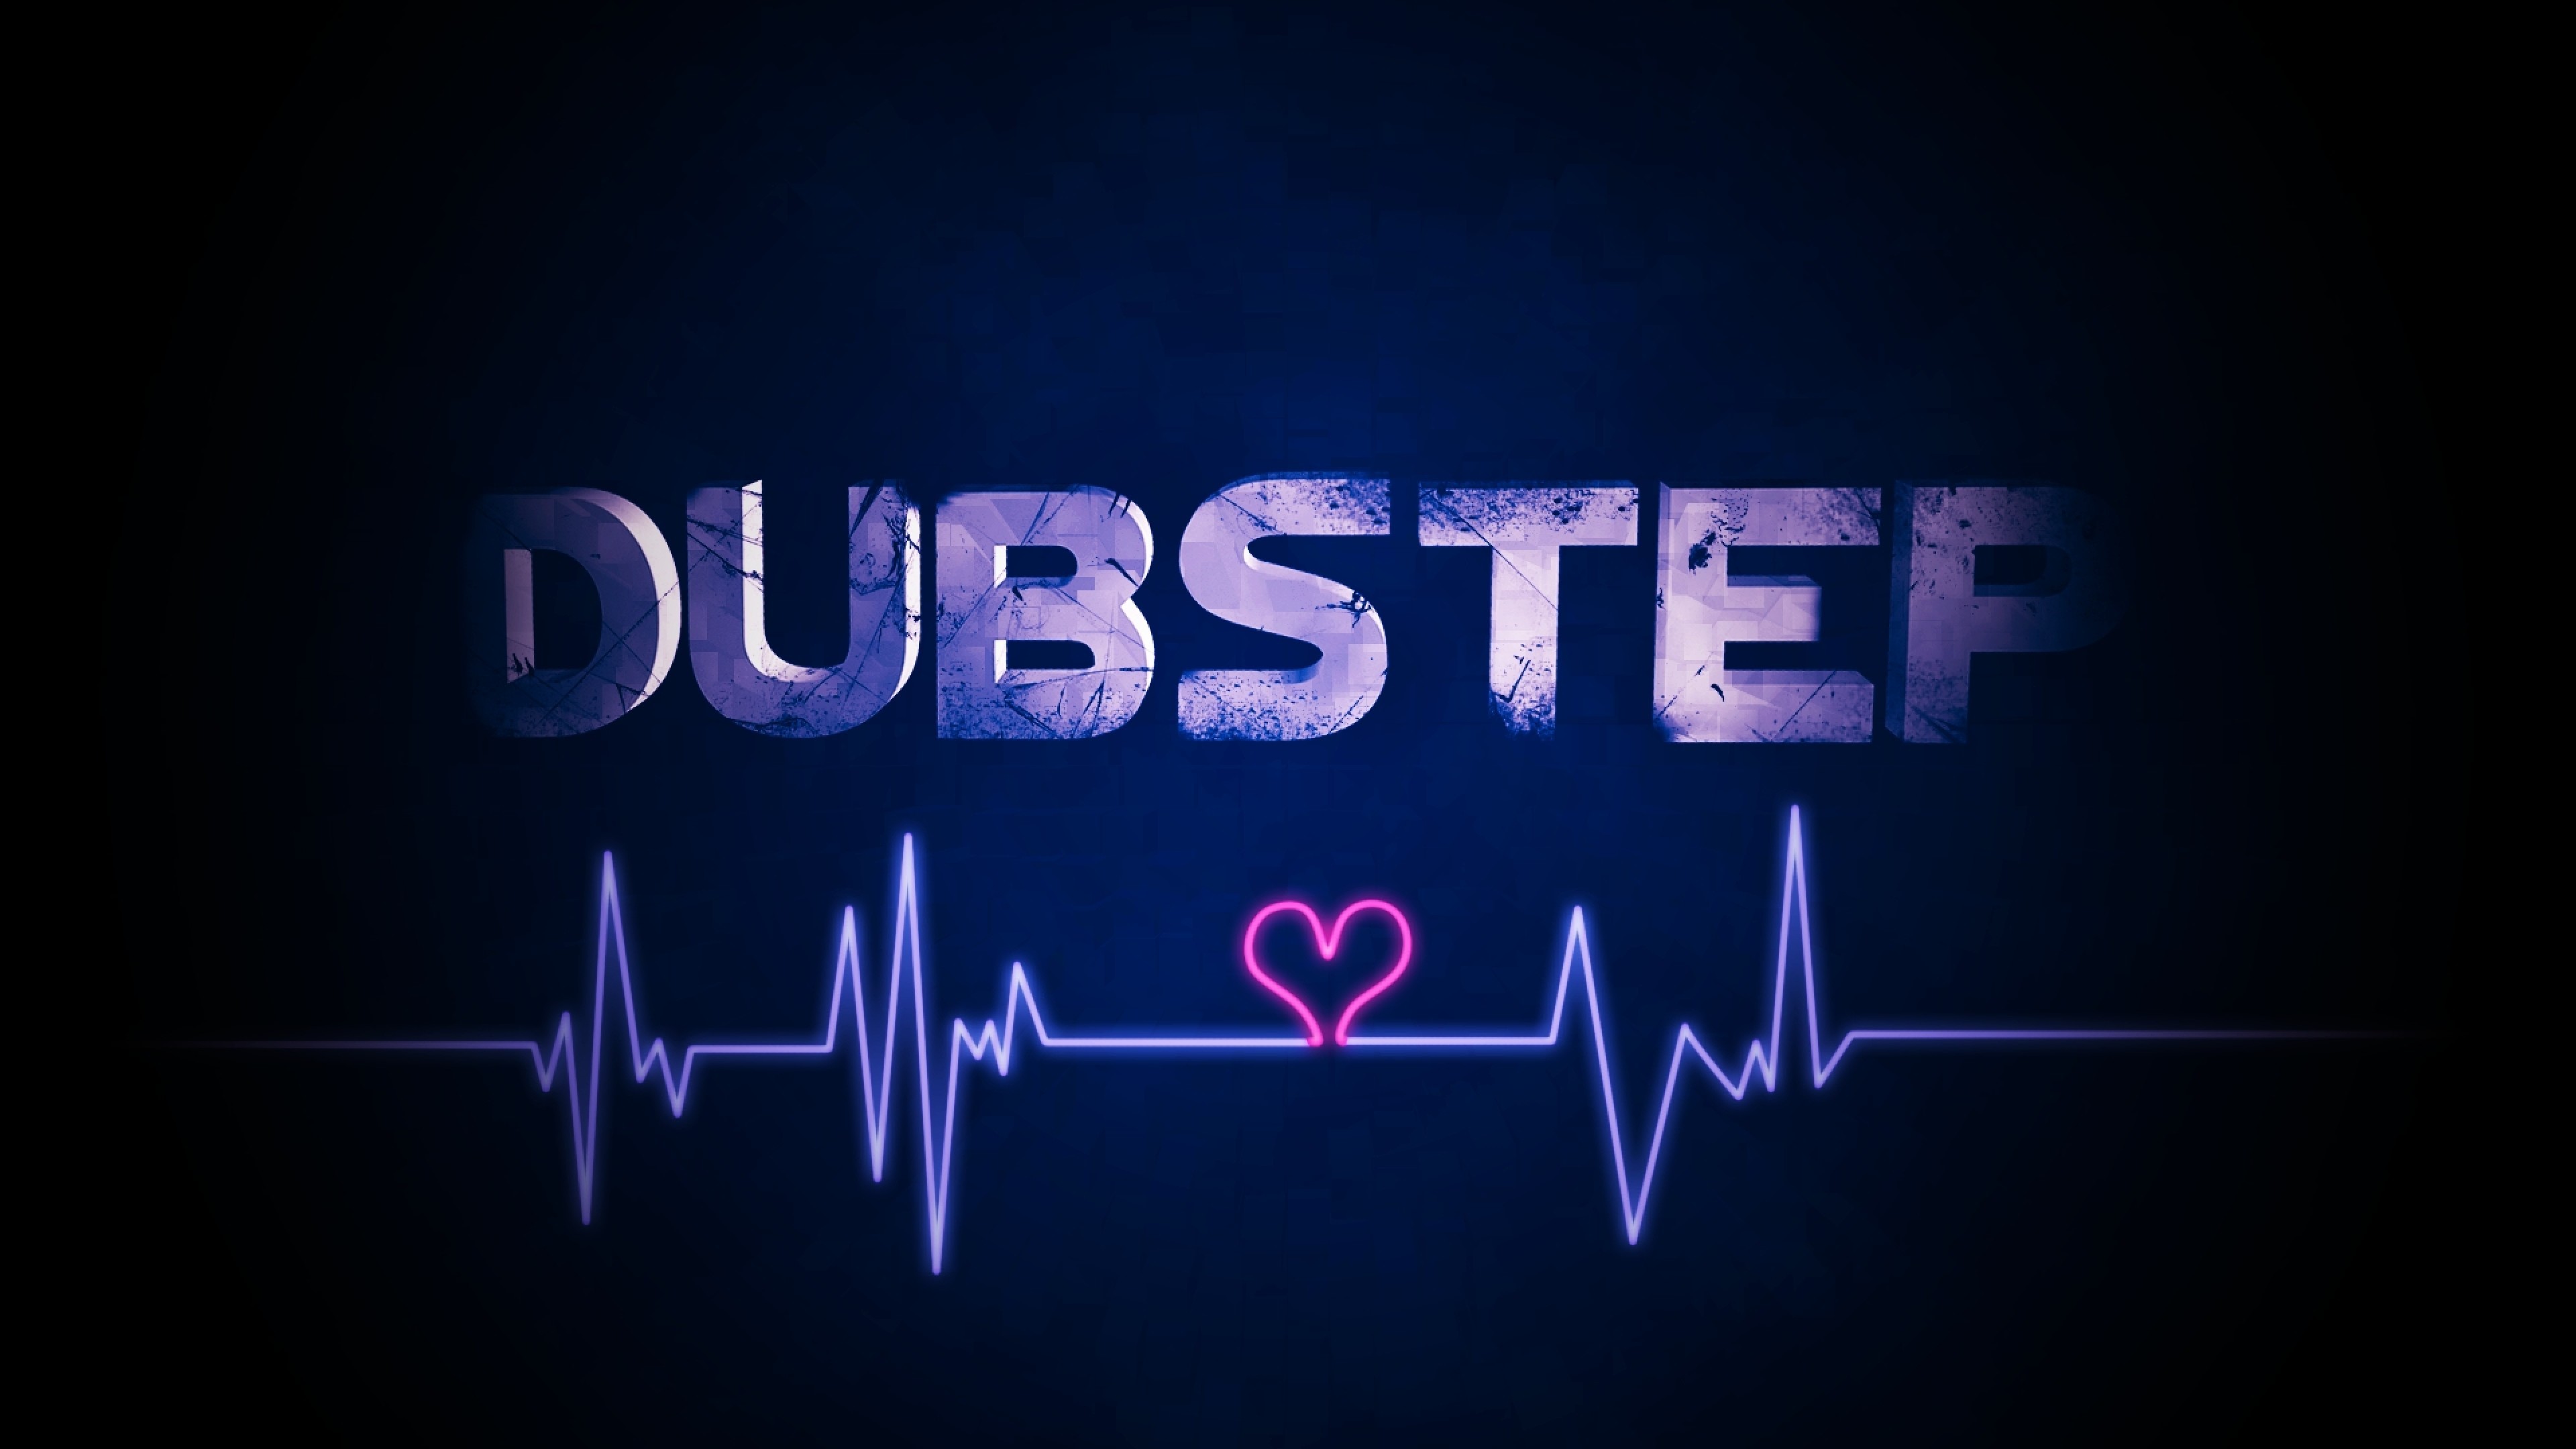 3840x2160 Dubstep, Electronic, Music